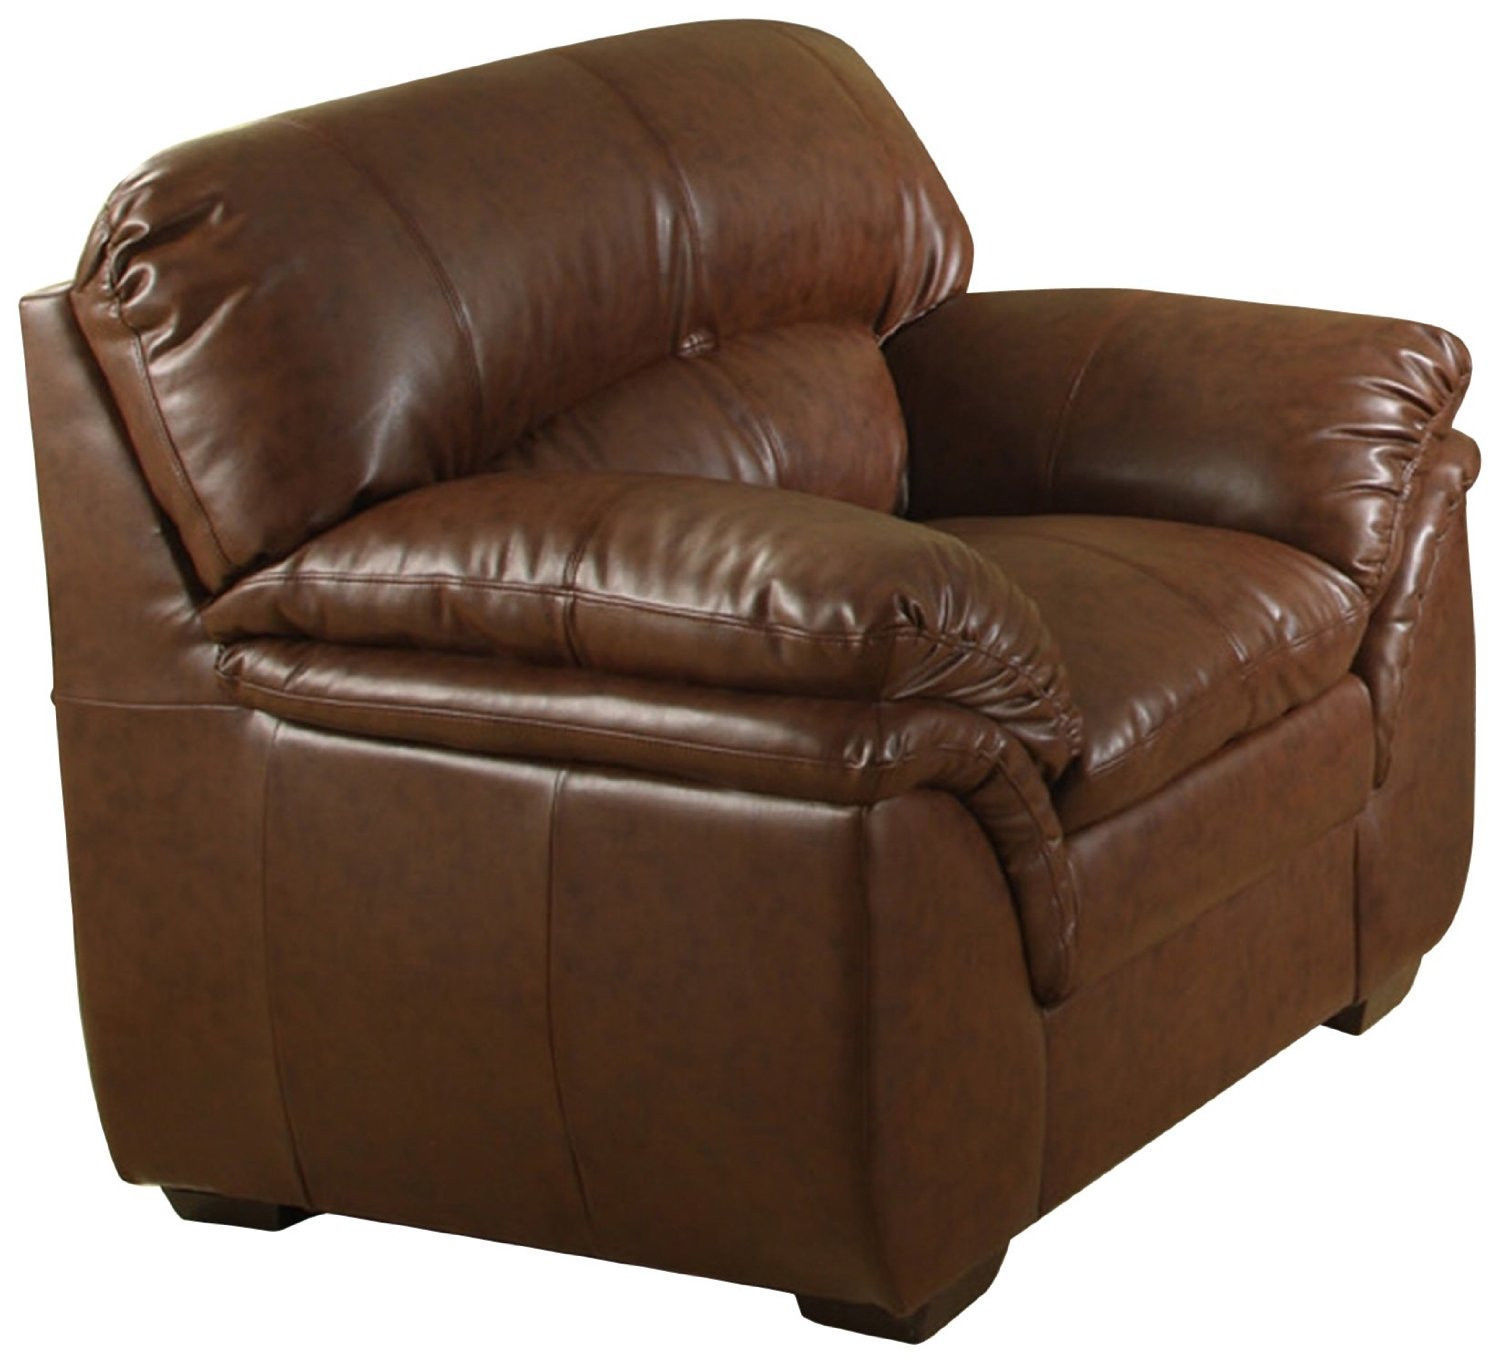 overstuffed leather chair